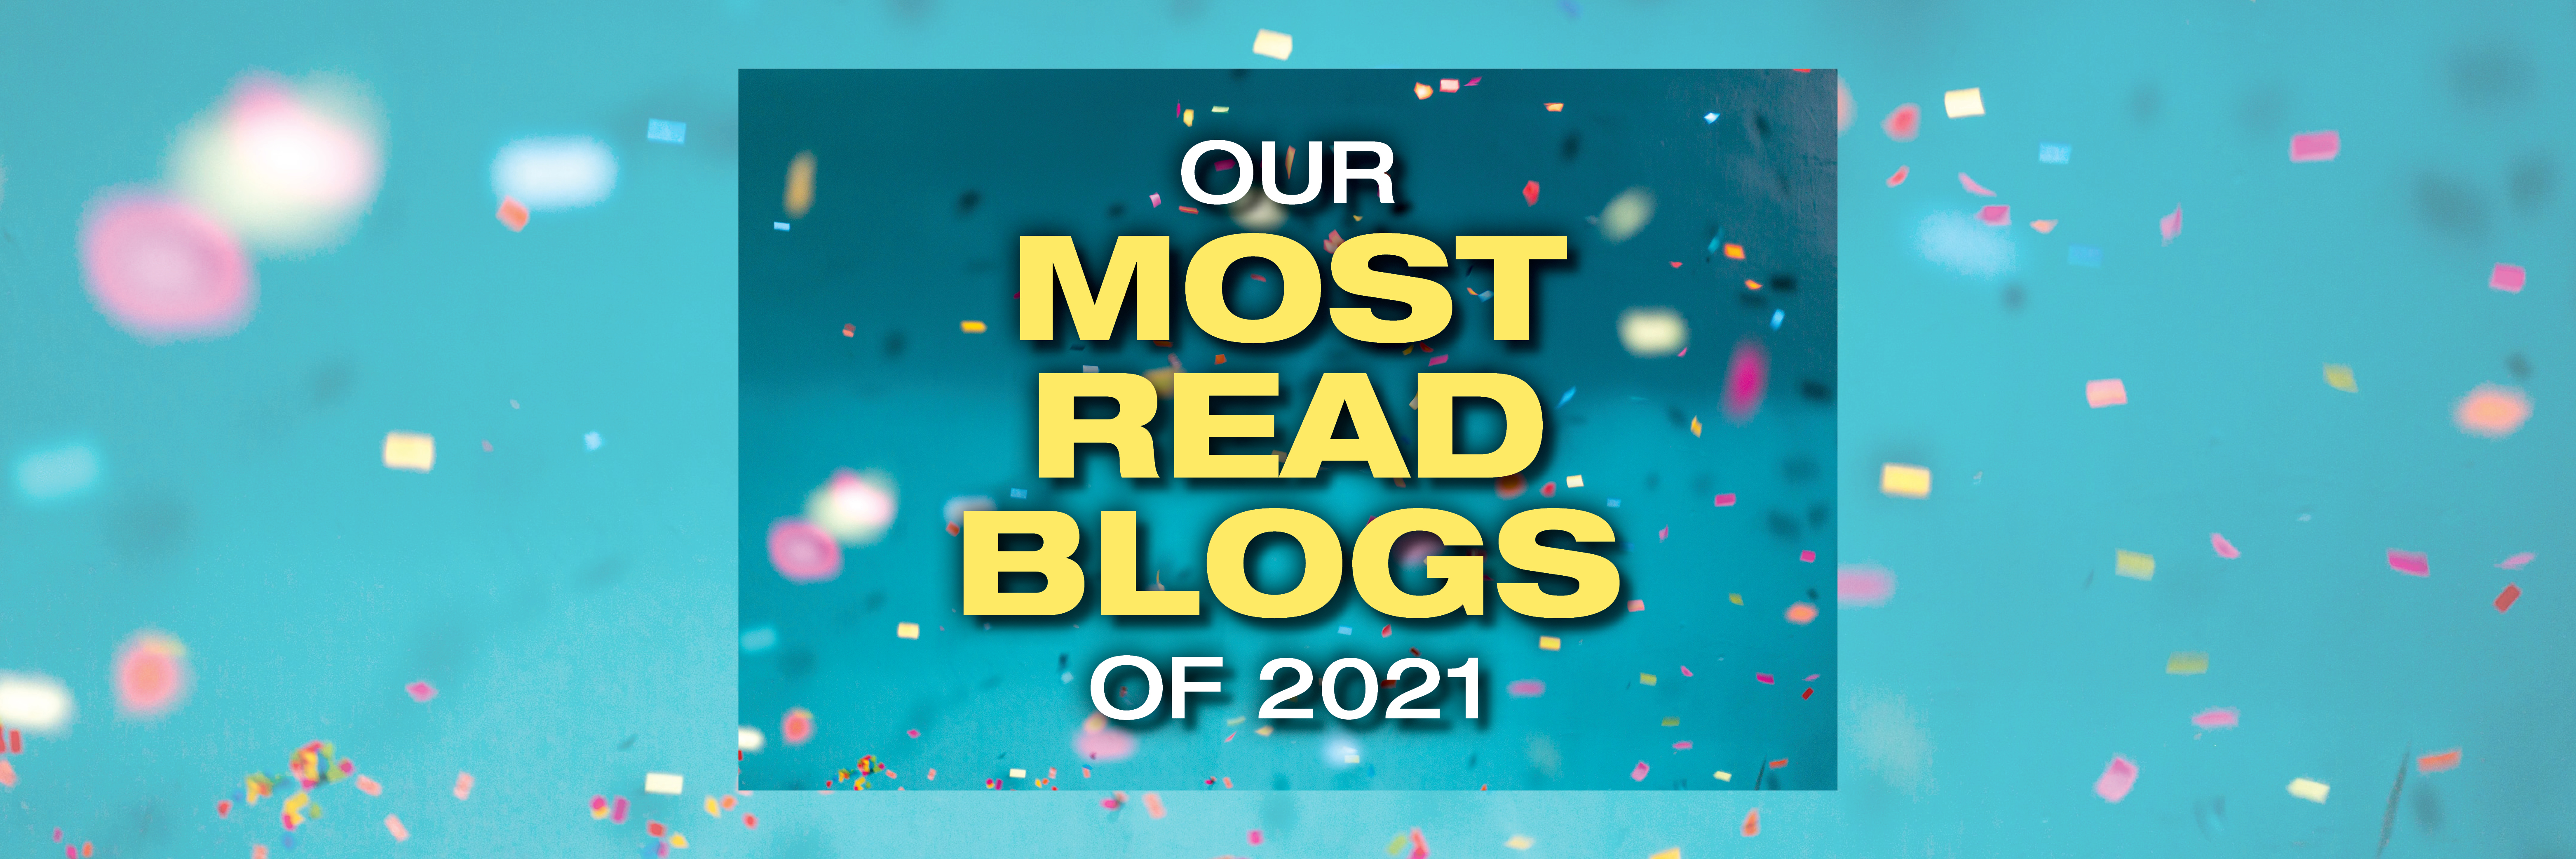 Our Most Read Blogs of 2021